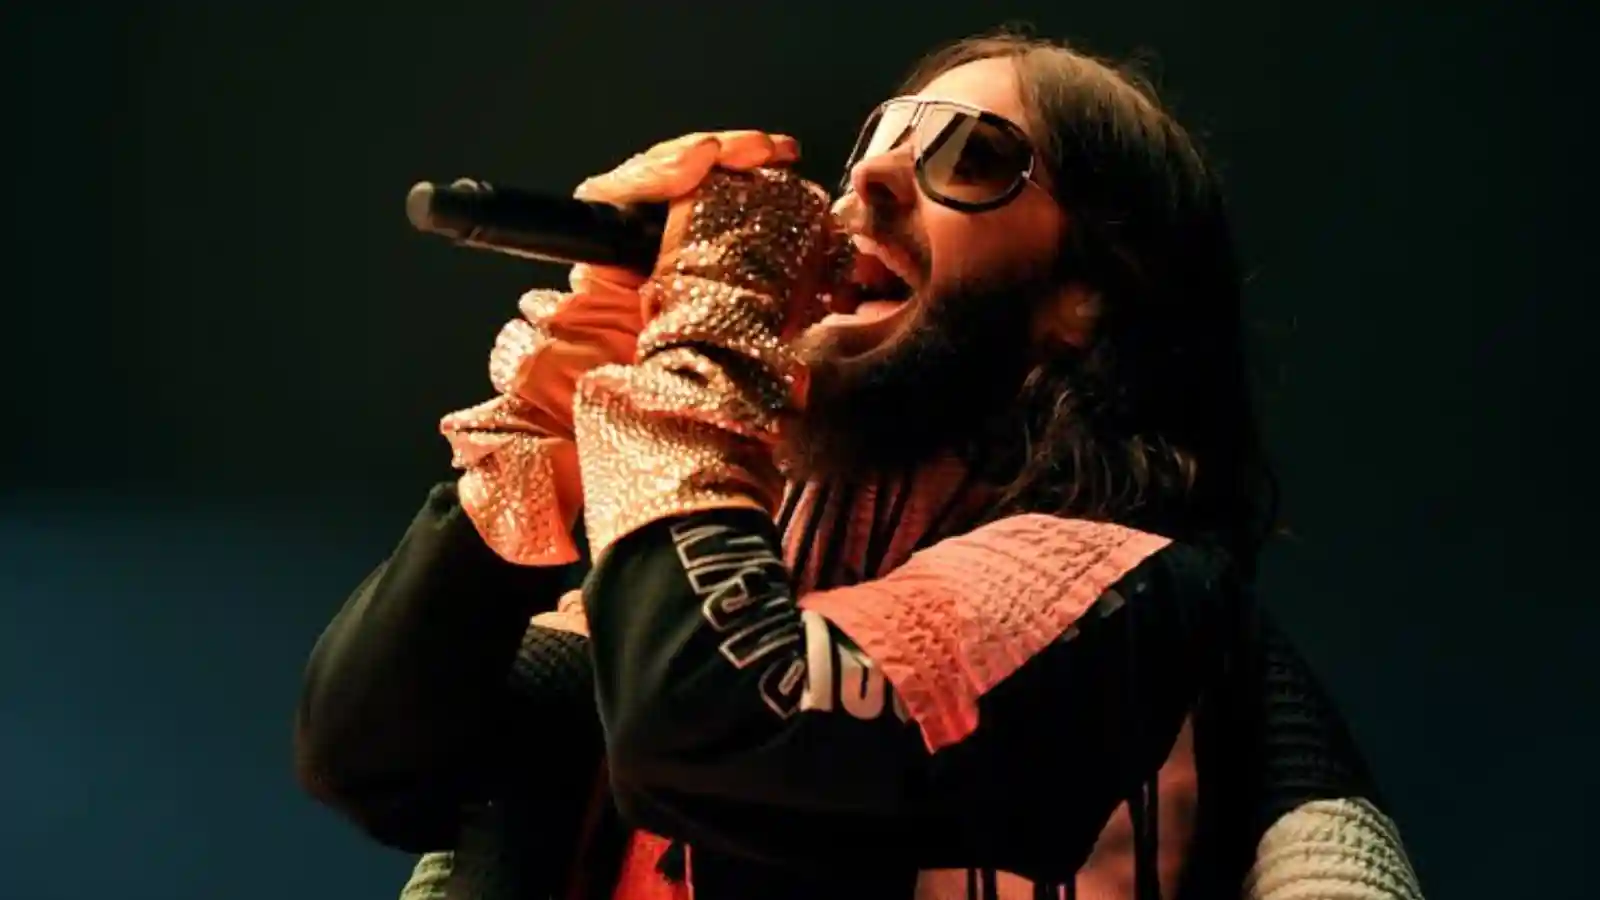 Jared during a concert